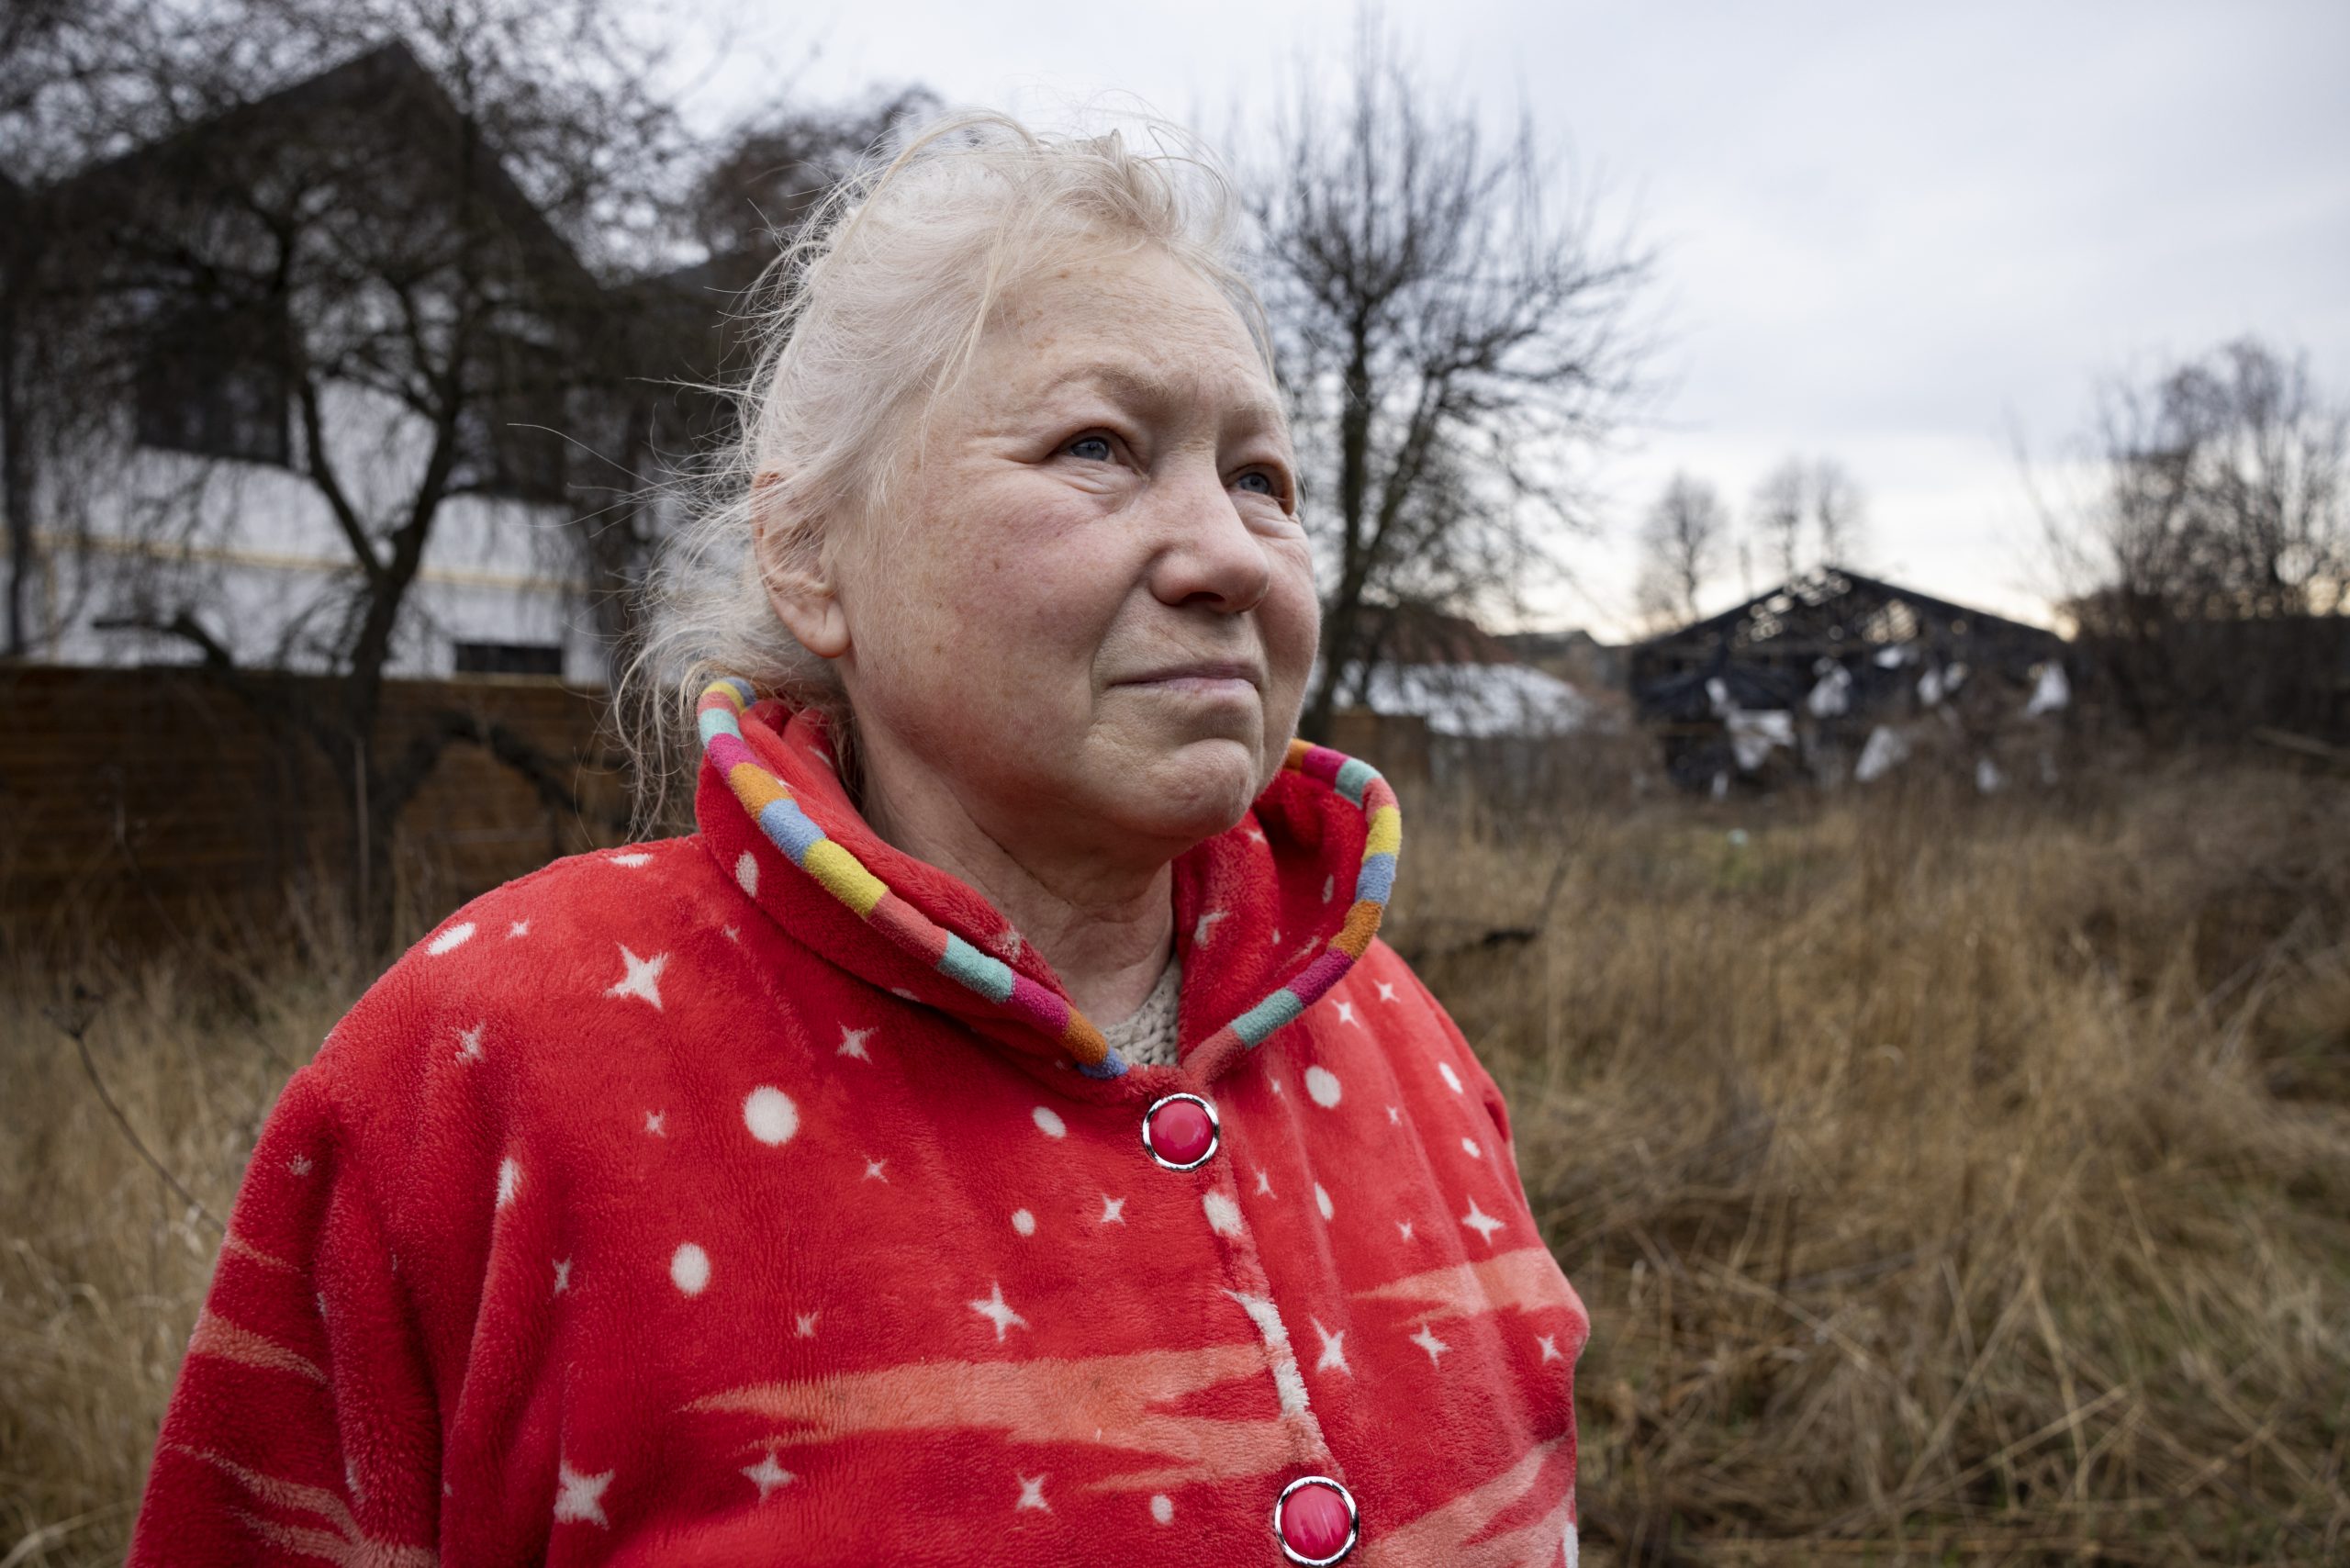 This woman's family was a victim of Russian barbarism.